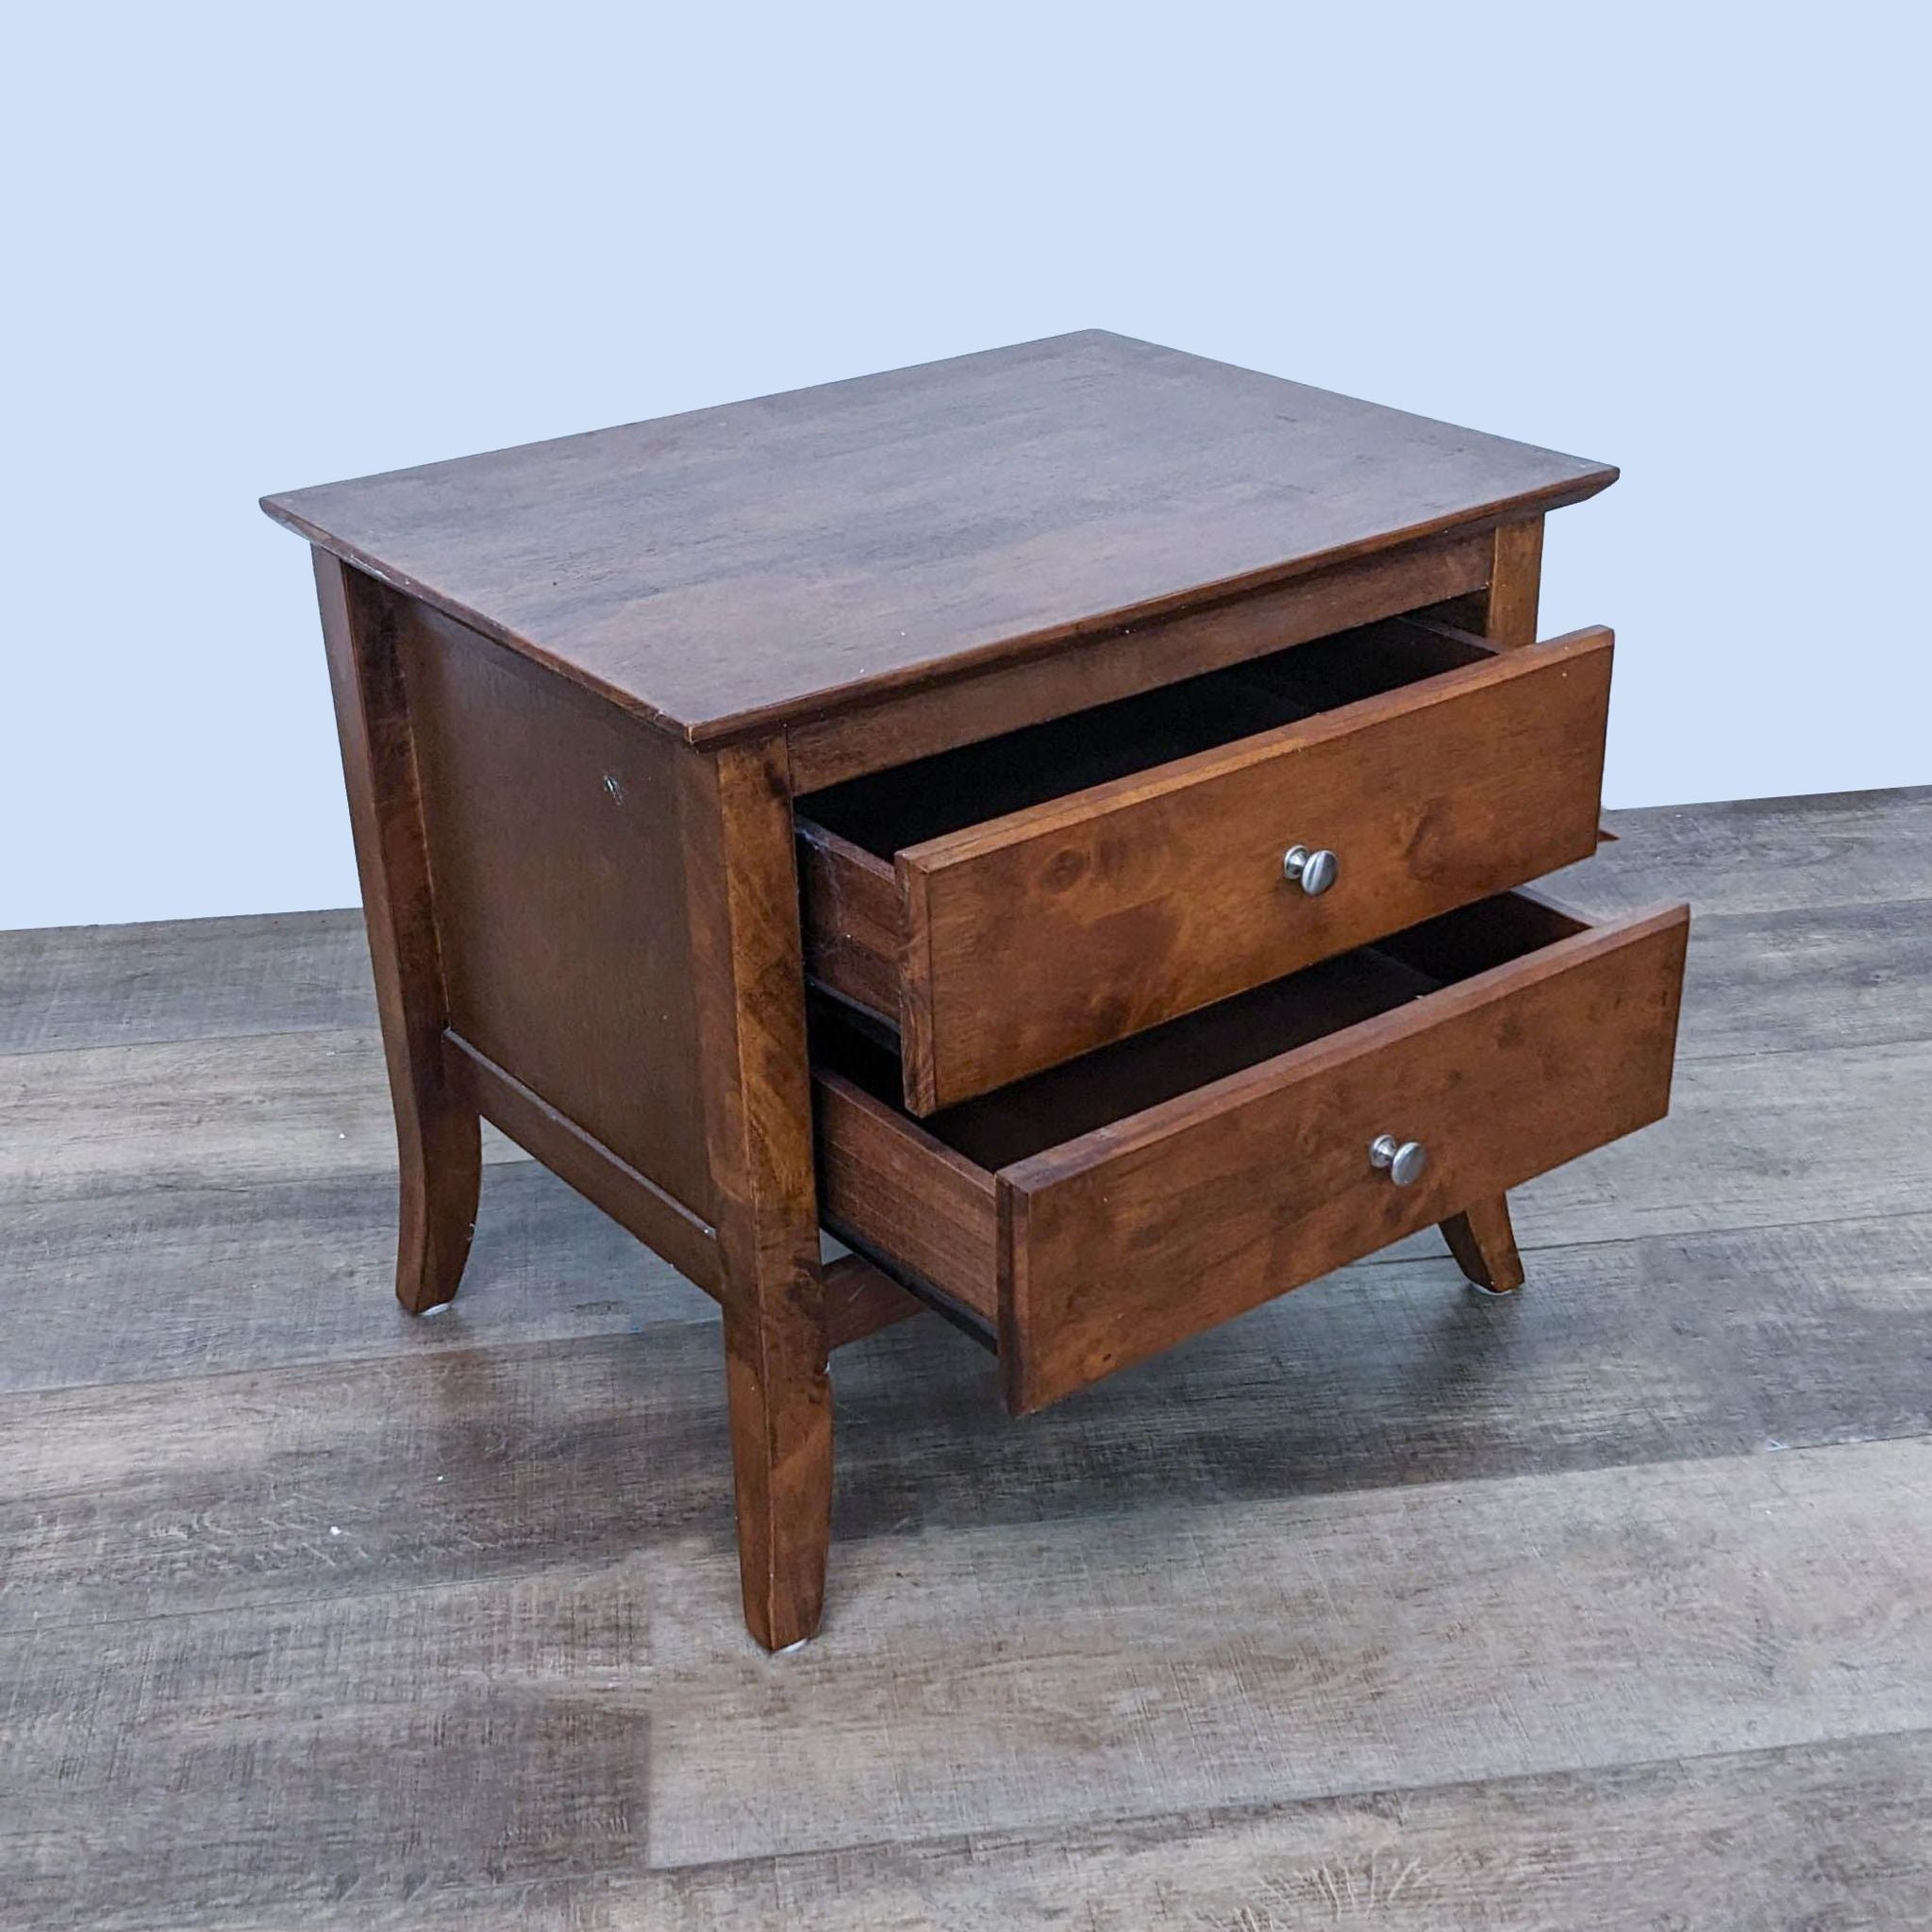 Opened drawers of Reperch end table, displaying interior, angled view on wooden floor.